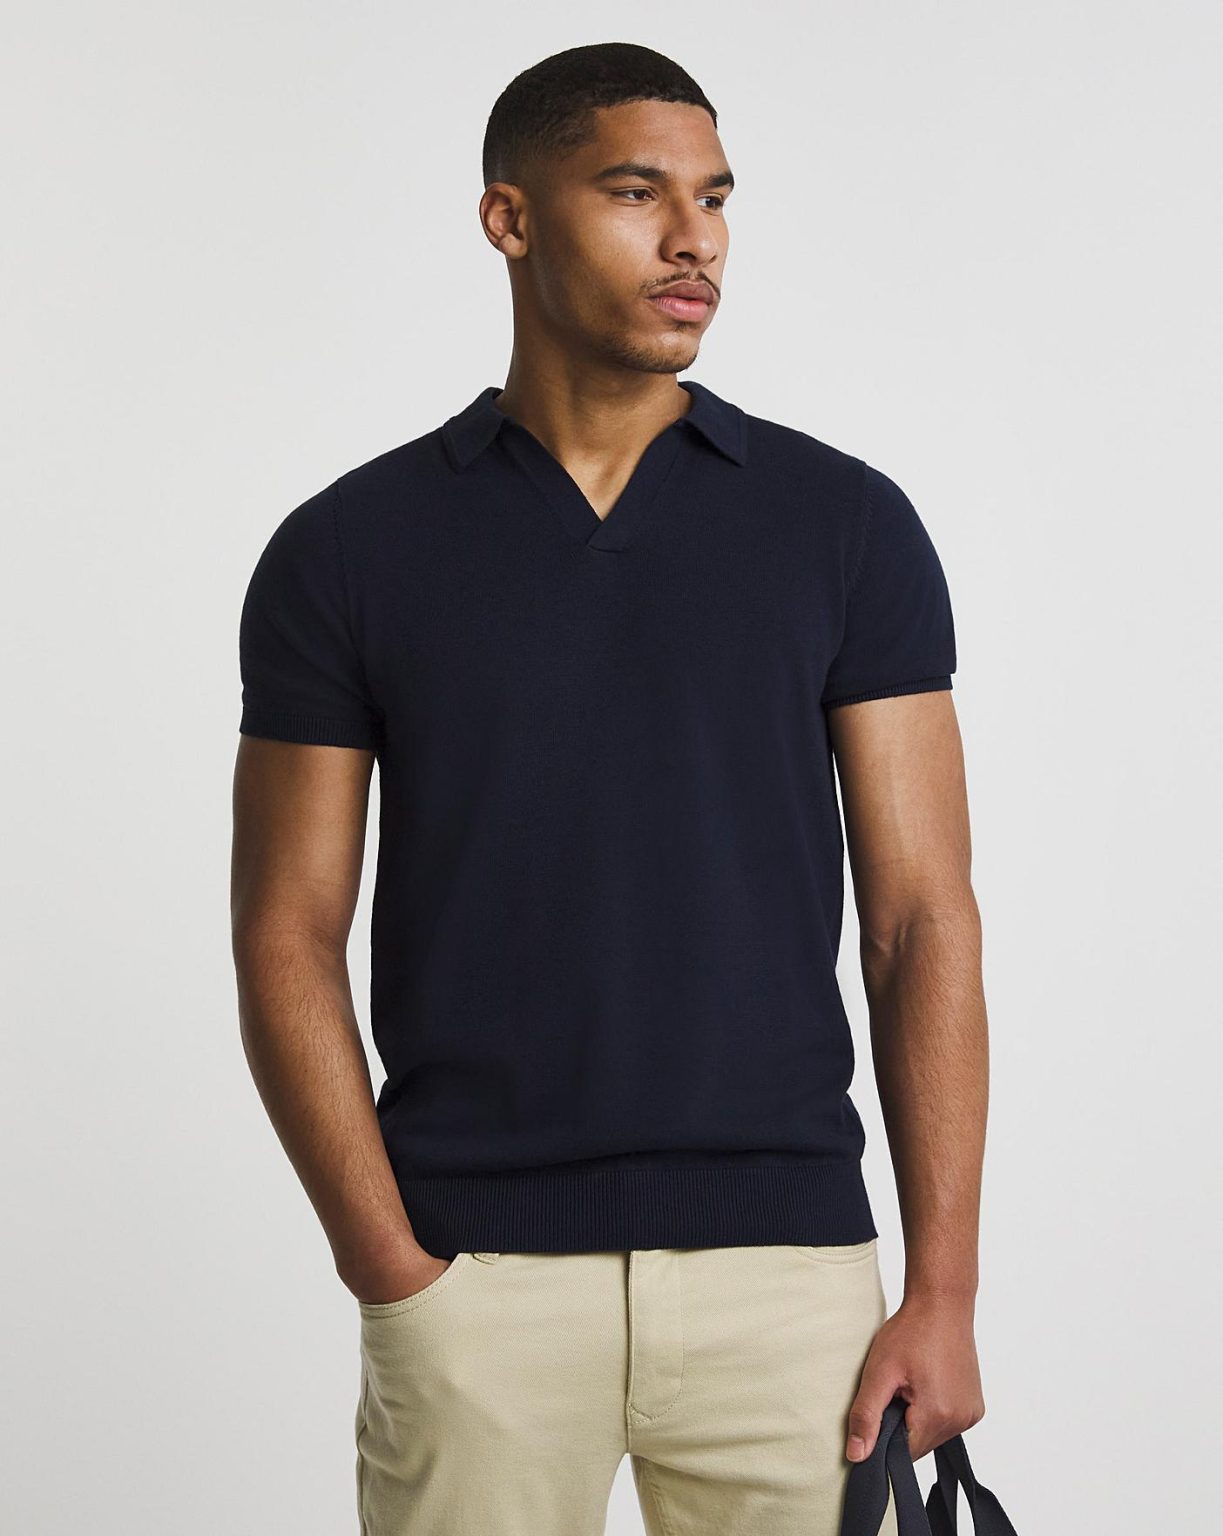 7 Polo Shirts to Wear This Summer - The Frisky